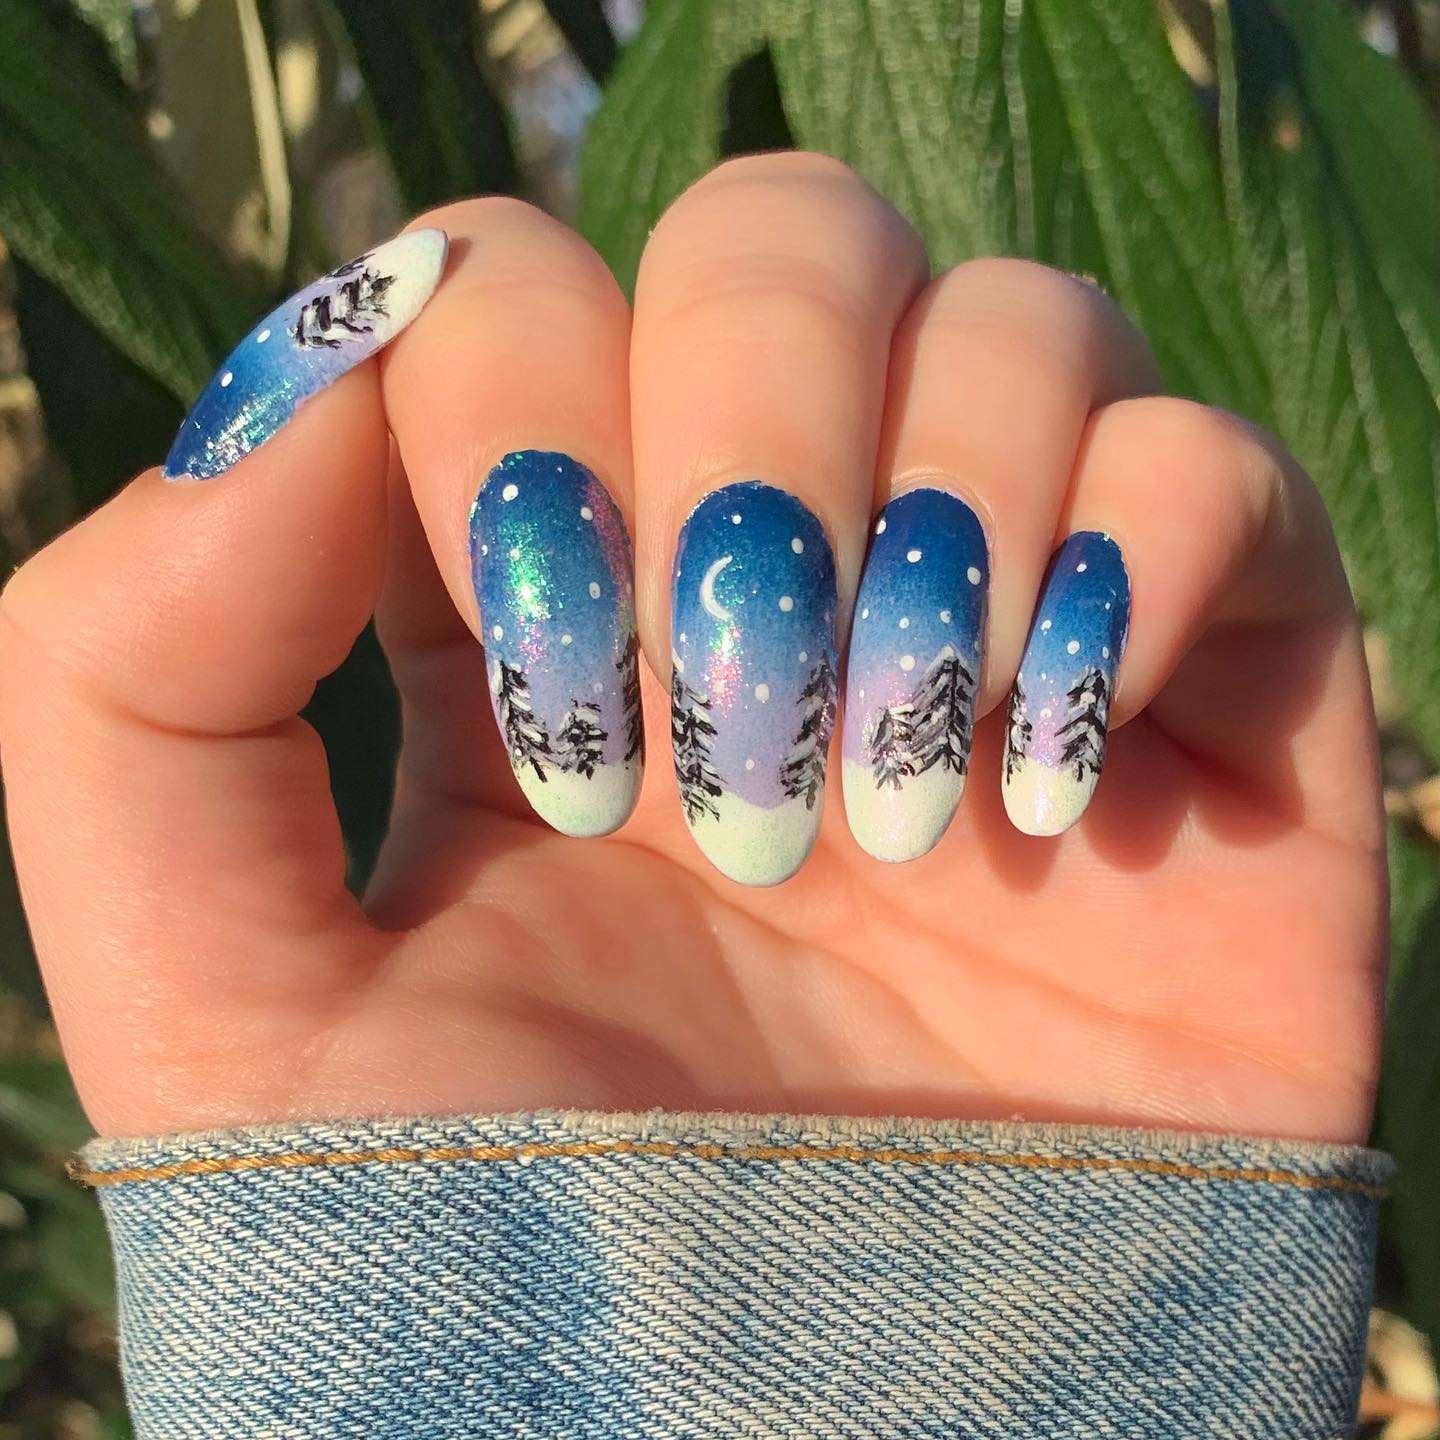  Here is an another winter landscape with trees, moon and snow. This nail art shows a different period of time, which is night. Dark blue effect gives this impression and it is simply amazing.